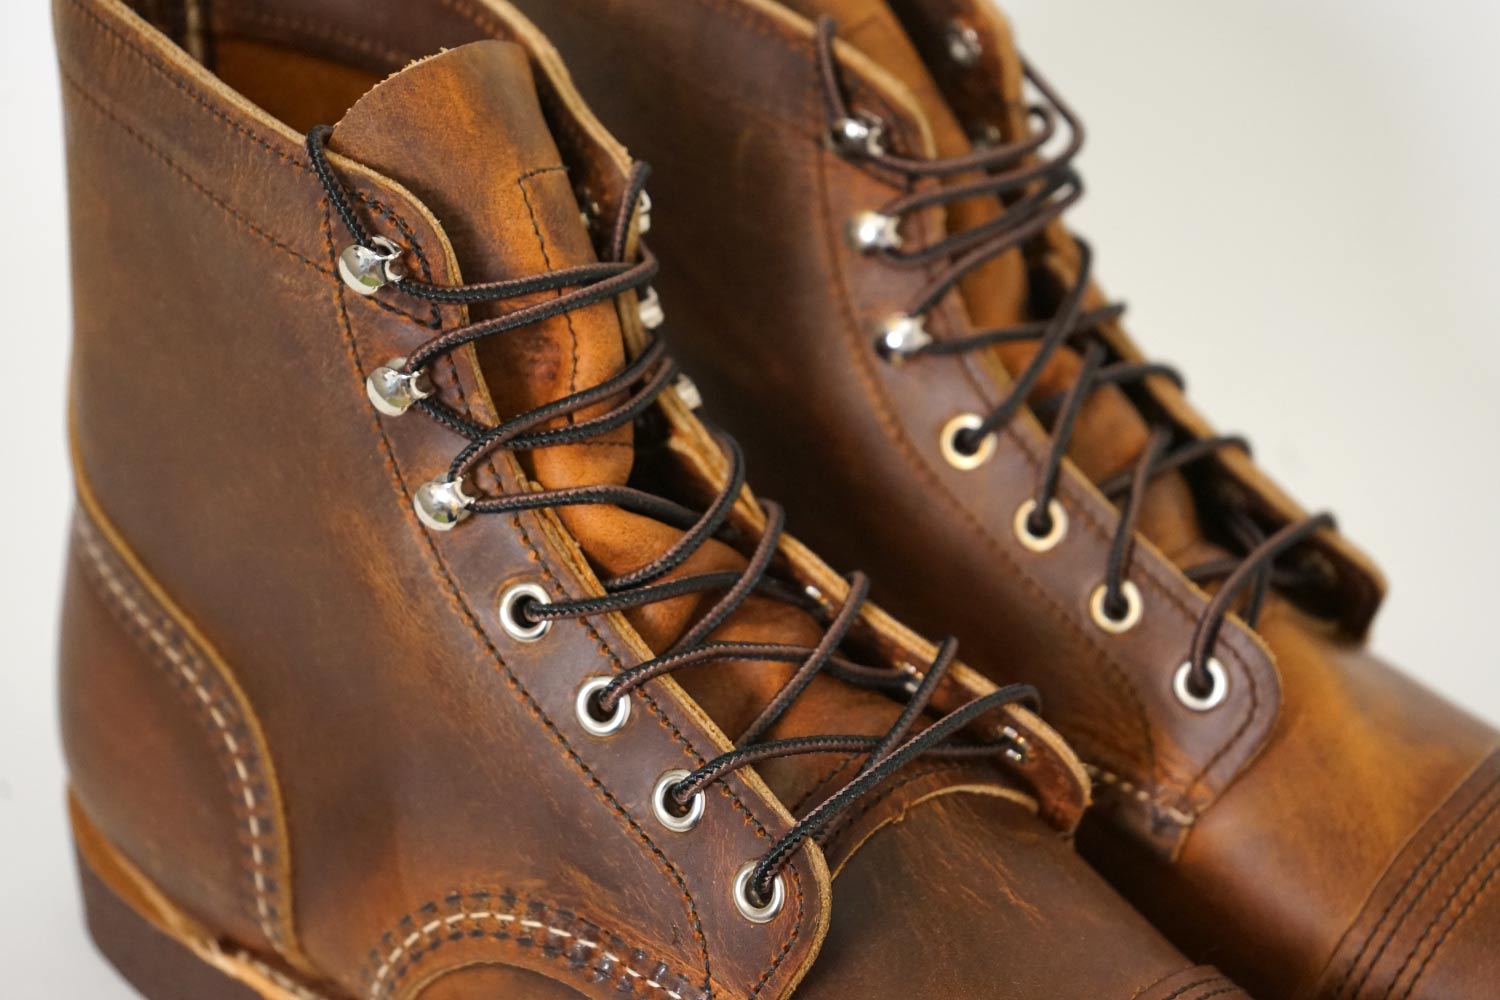 The laces on a pair of Red Wing boots made in Minnesota